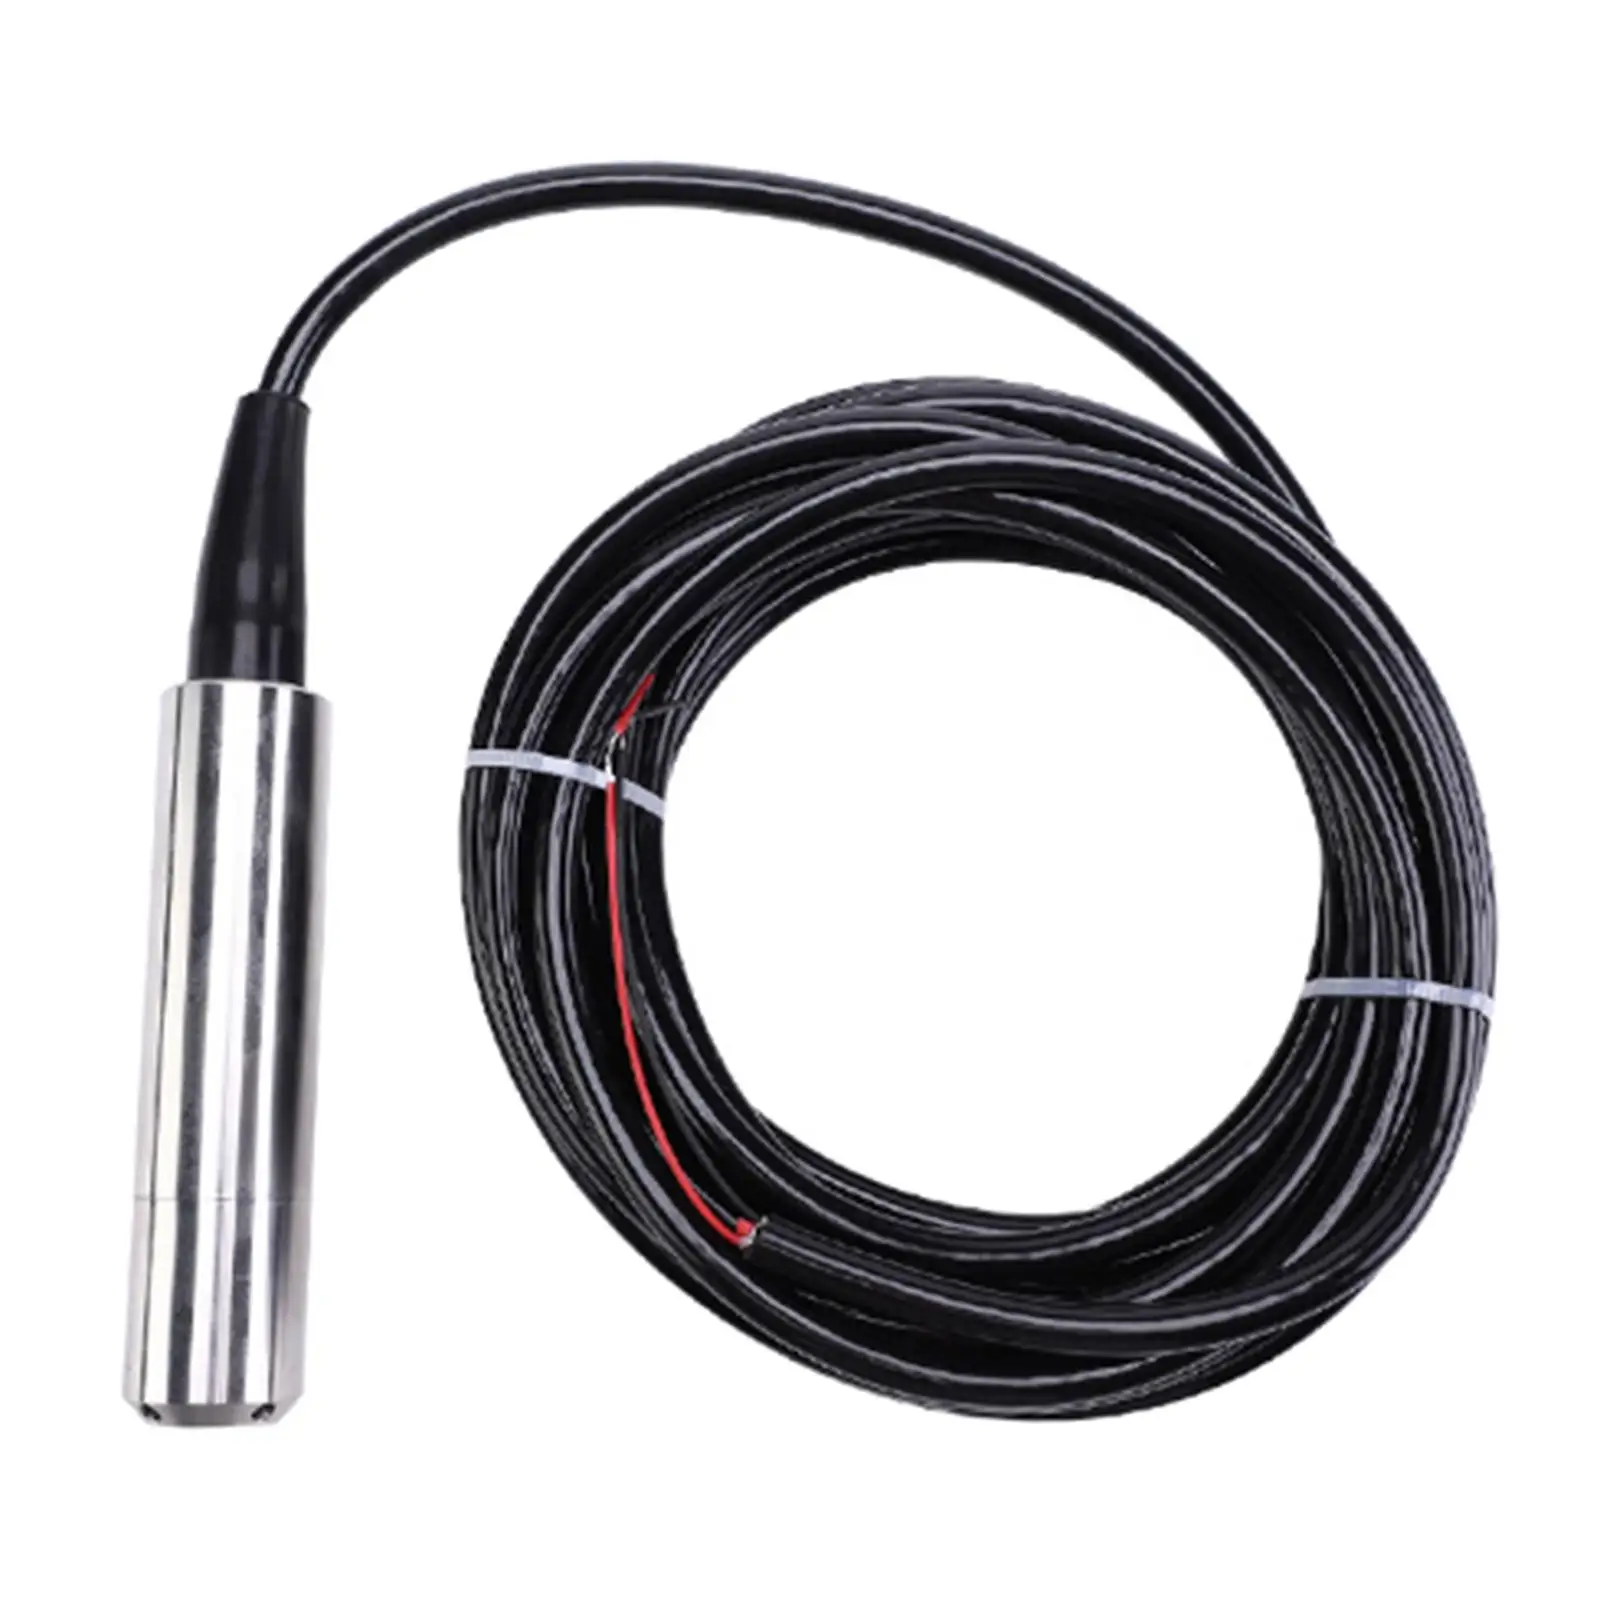 Submersible Water Level Transmitter Level Transducer V 4-20mA with 5 meters Cable